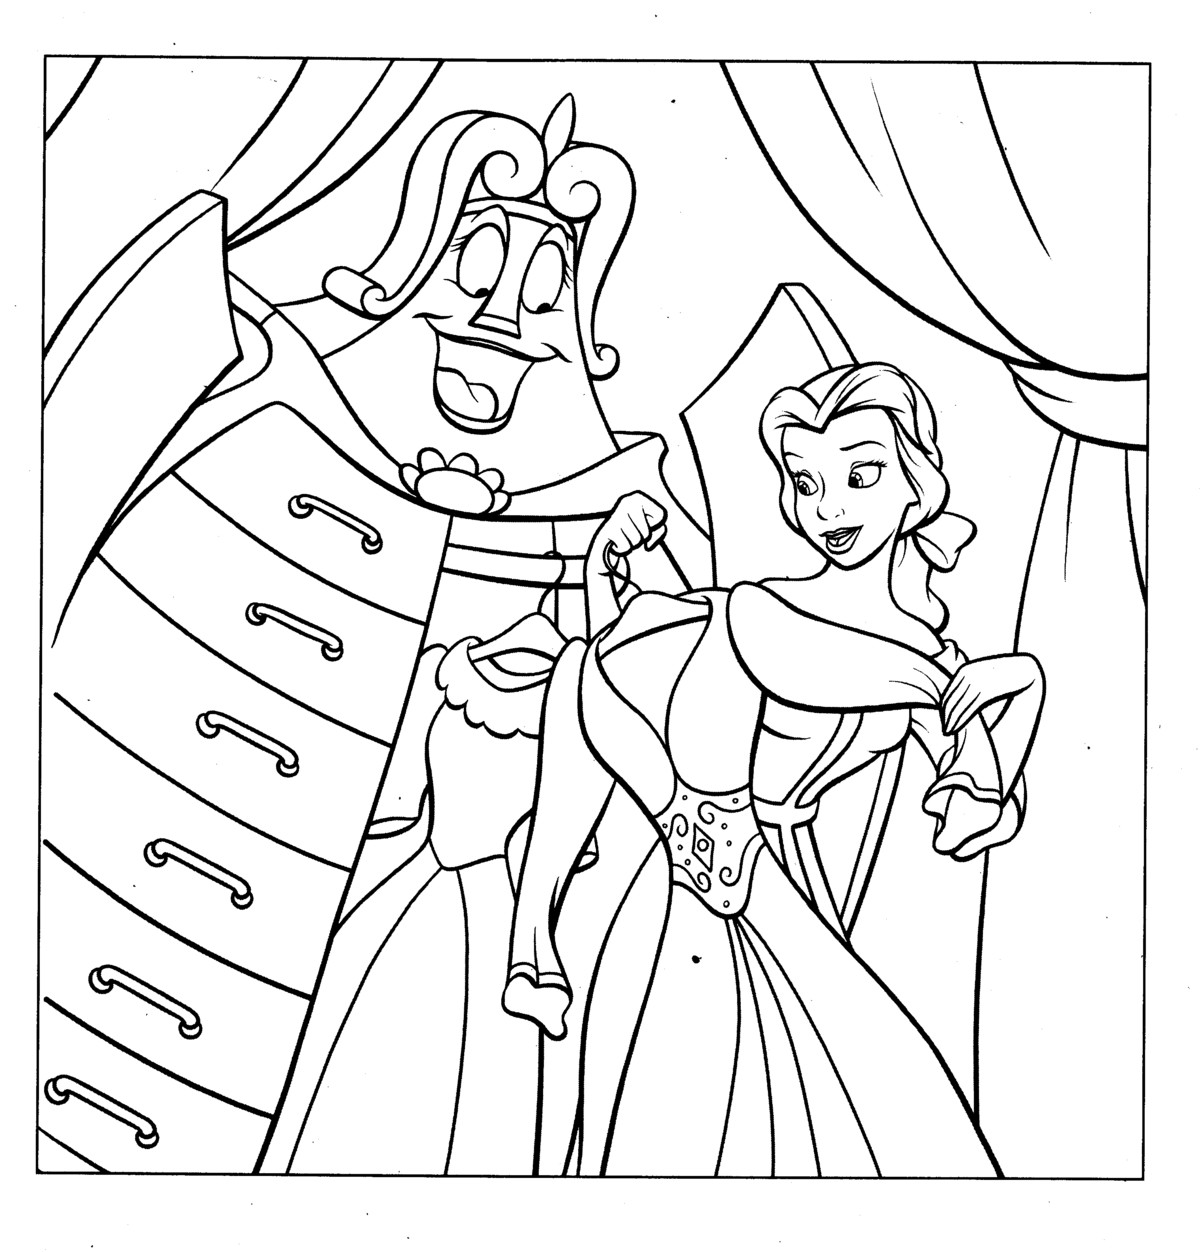  Belle Princess Coloring Pages For Kids